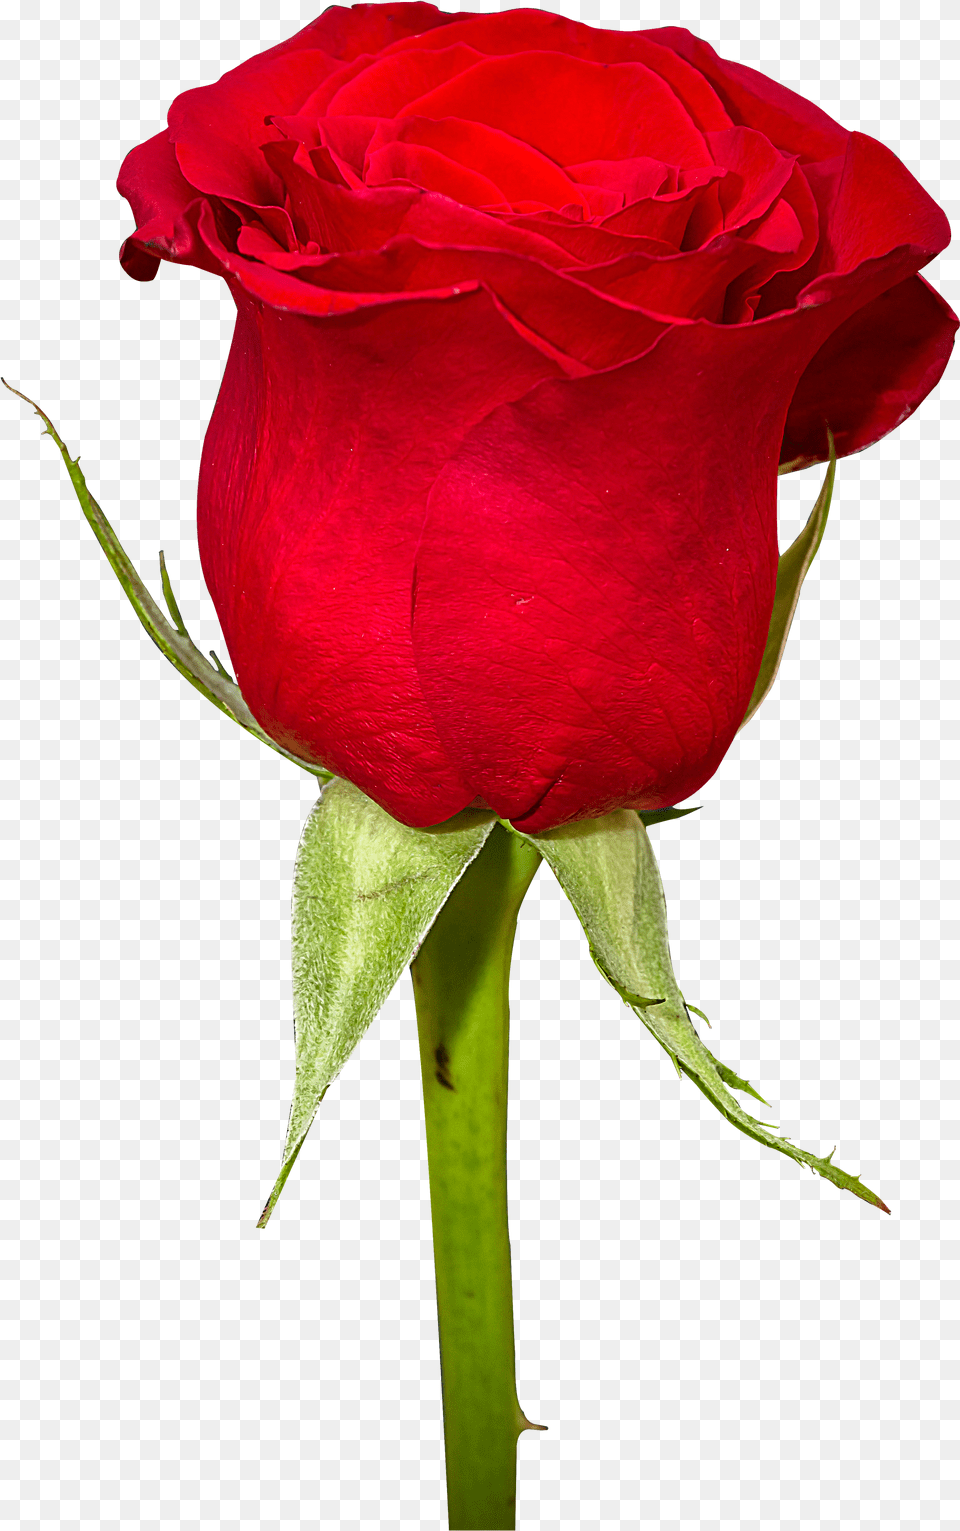 Red Roses For Women Icons And Backgrounds Rose Flowers Image Png